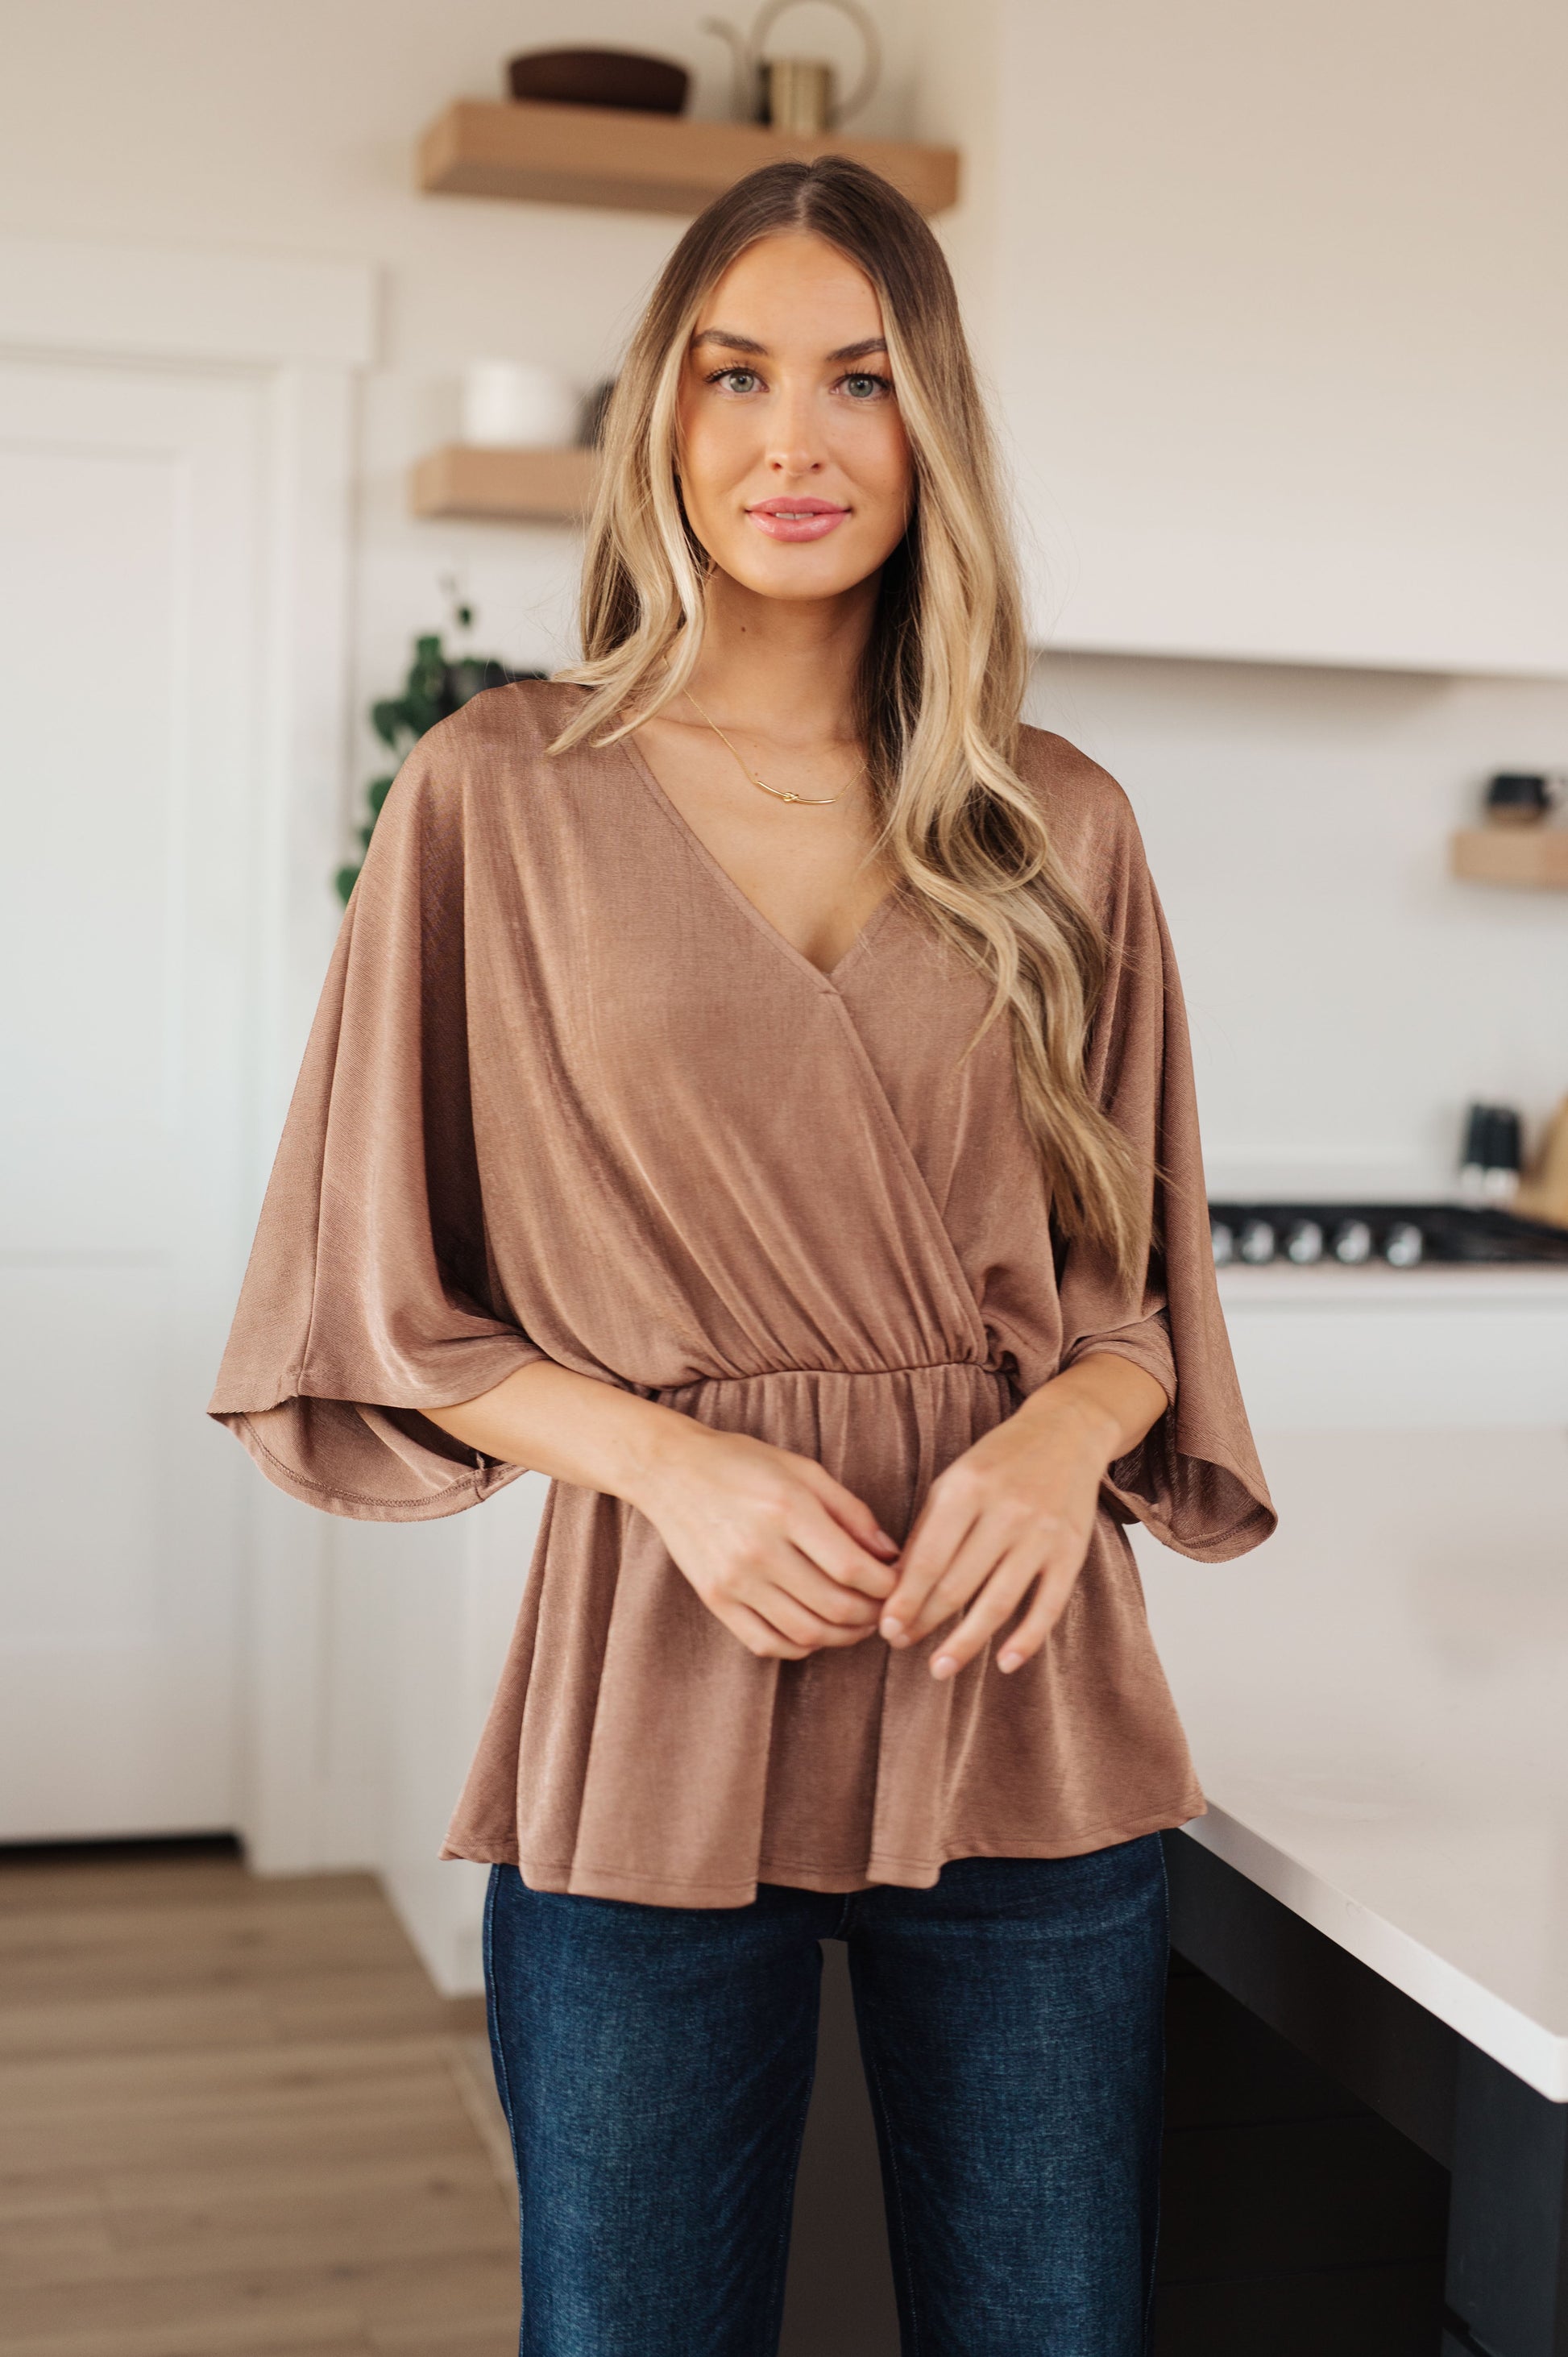 Meet the Dazzlingly Draped V-Neck Blouse! This elevated peplum style is constructed from a gorgeous shimmering bronze fabrication, a surplice front forms the flattering V-neckline. The cased elastic waistband gathers in to create a playful peplum silhouette. Pair with your favorite mini skirt or a pair of denim trousers, this blouse is easy to take from day to night. S - 2X